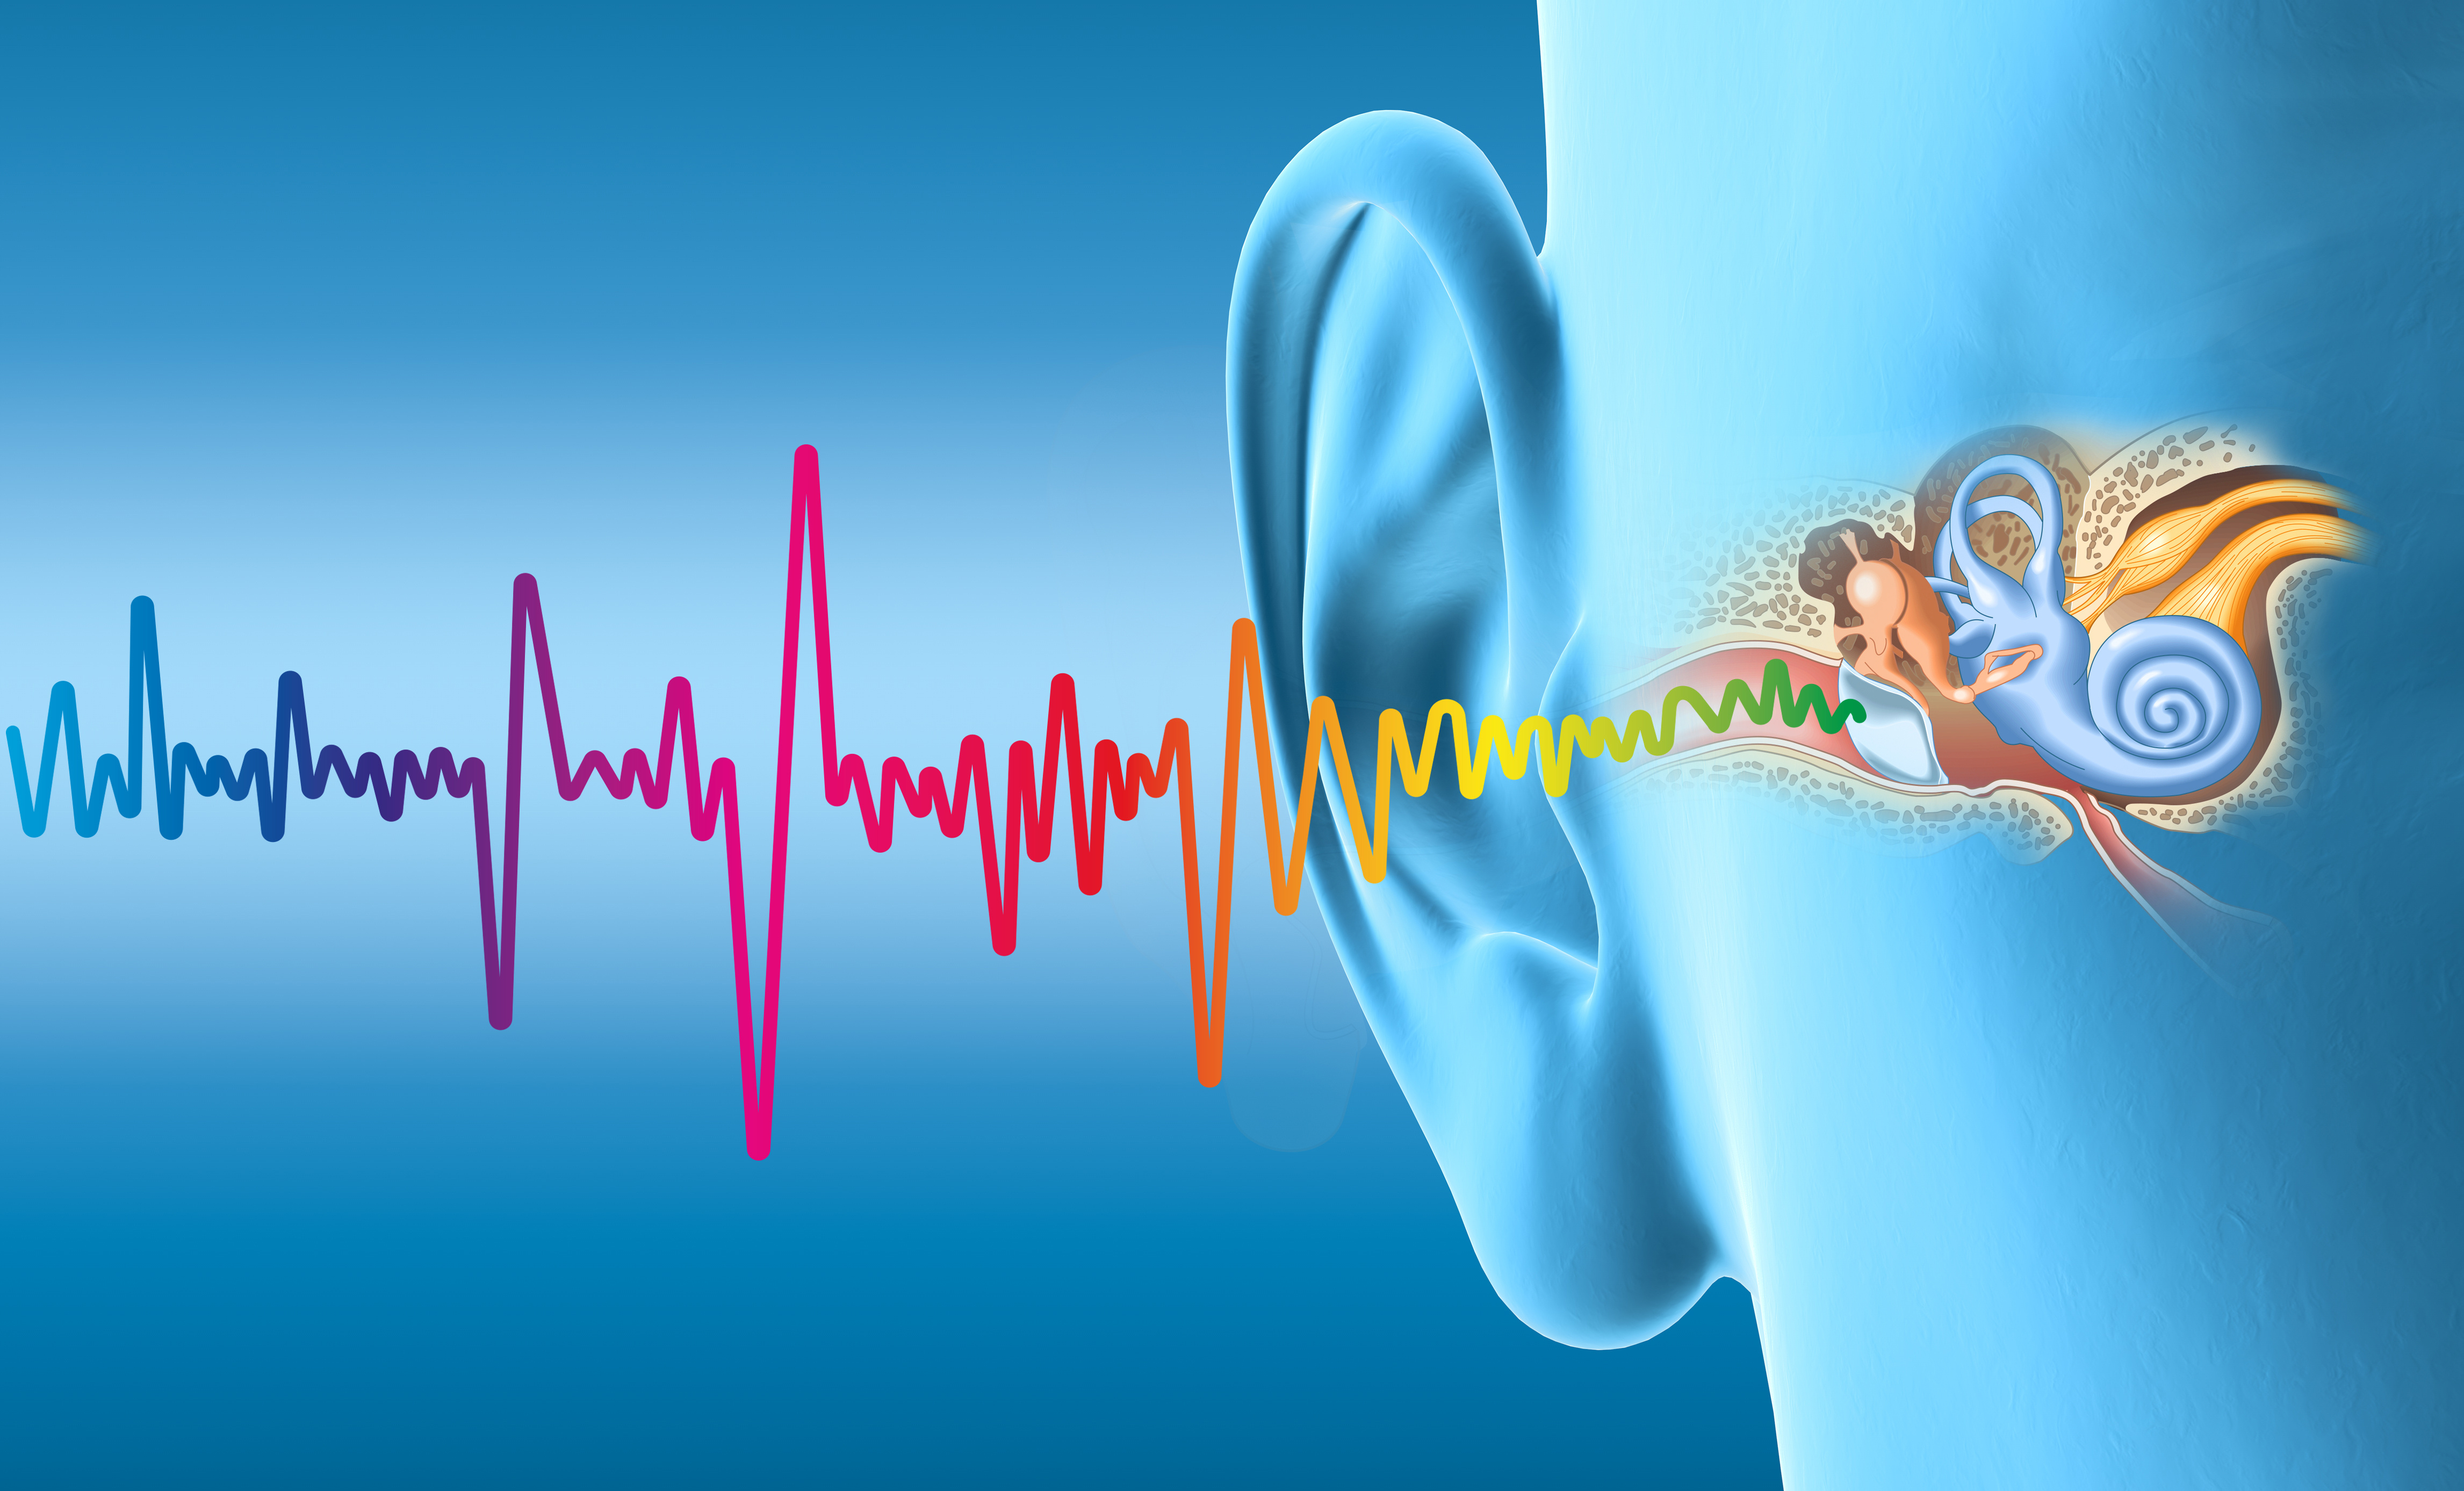 Anatomy of the Ear and How the Hearing System Works